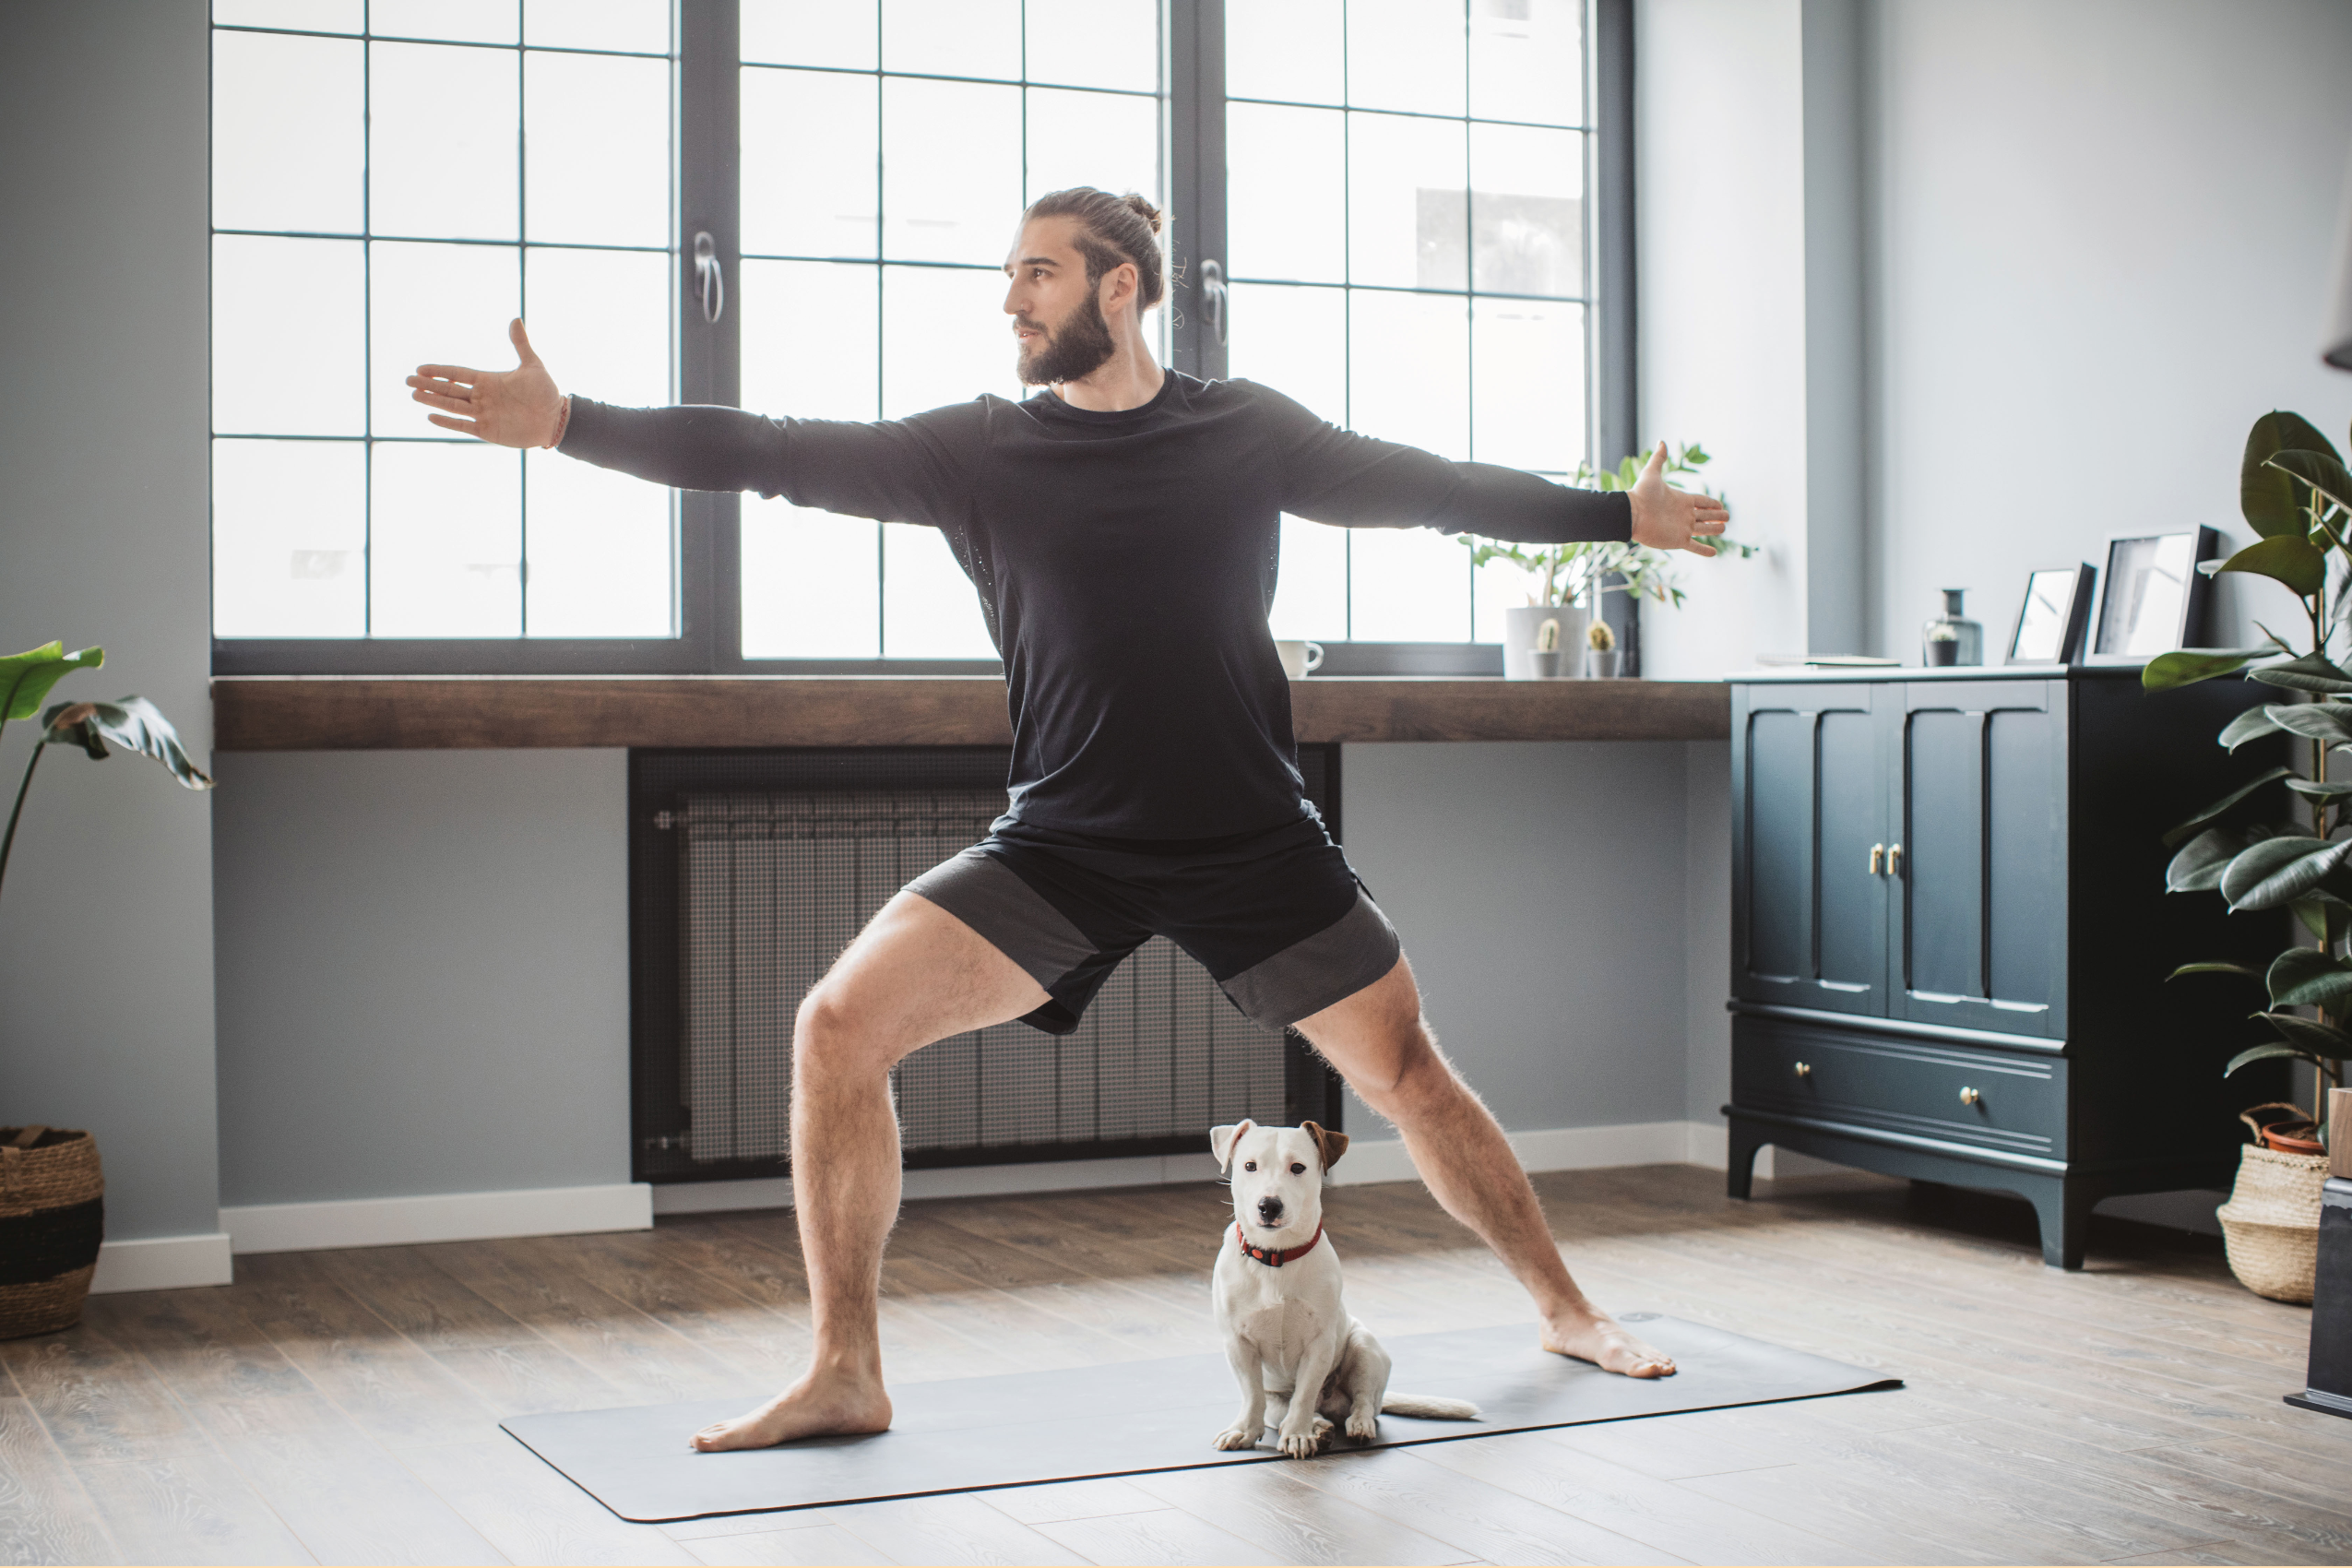 Yoga… not for puppies?